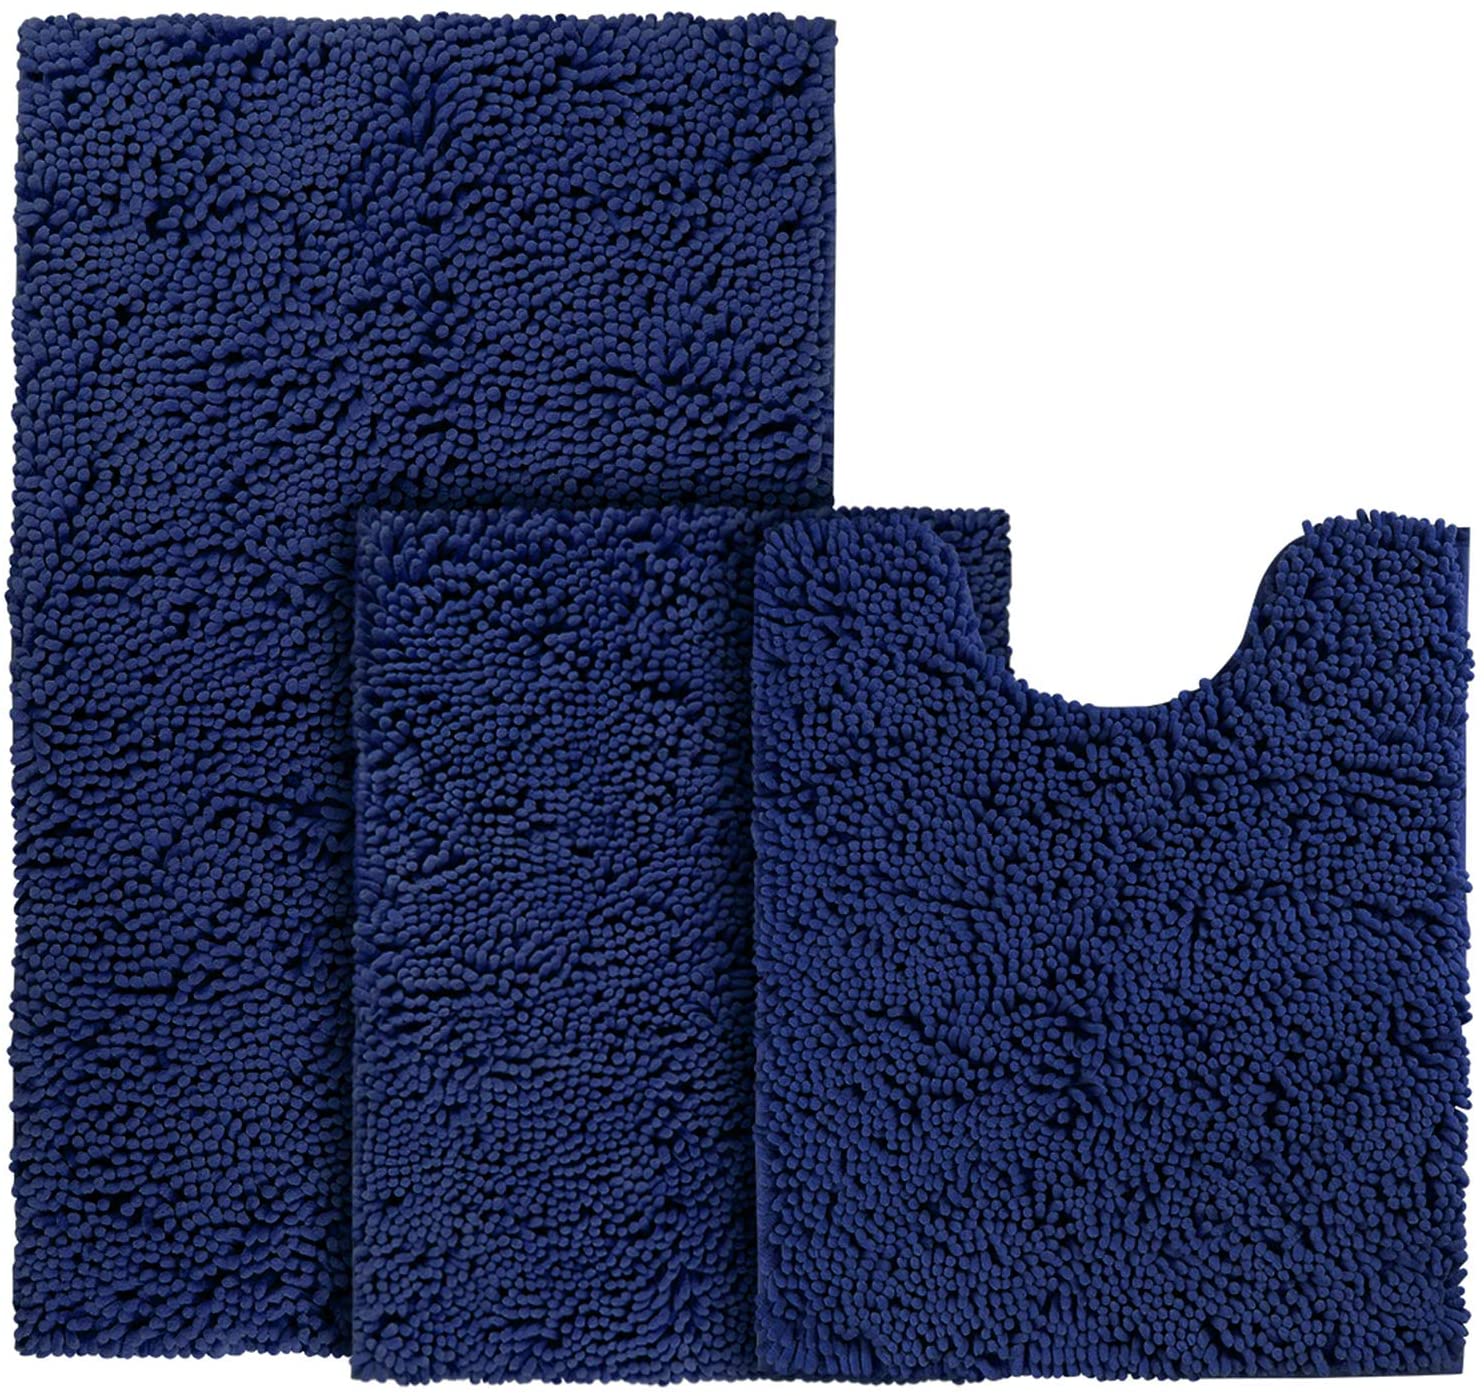 Details about   BYSURE Spa Blue Bathroom Rug Set 3 Piece Non Slip Extra Absorbent Shaggy Chenill 